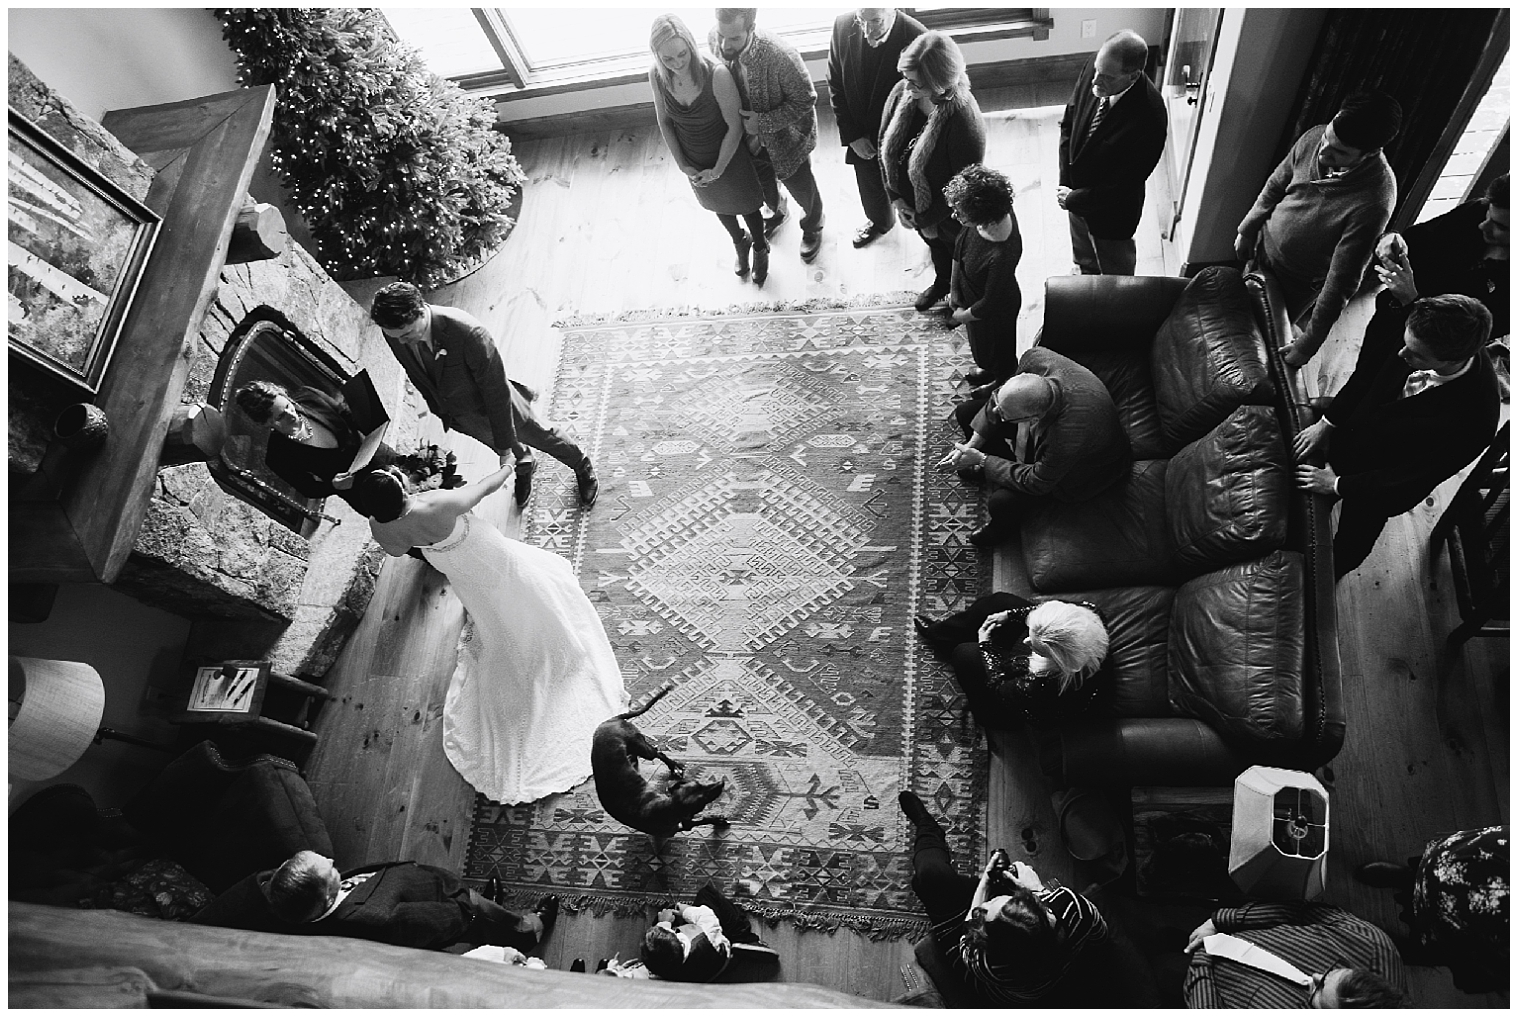 Arial view of a Breckenridge elopement ceremony, in a cabin with family looking on.